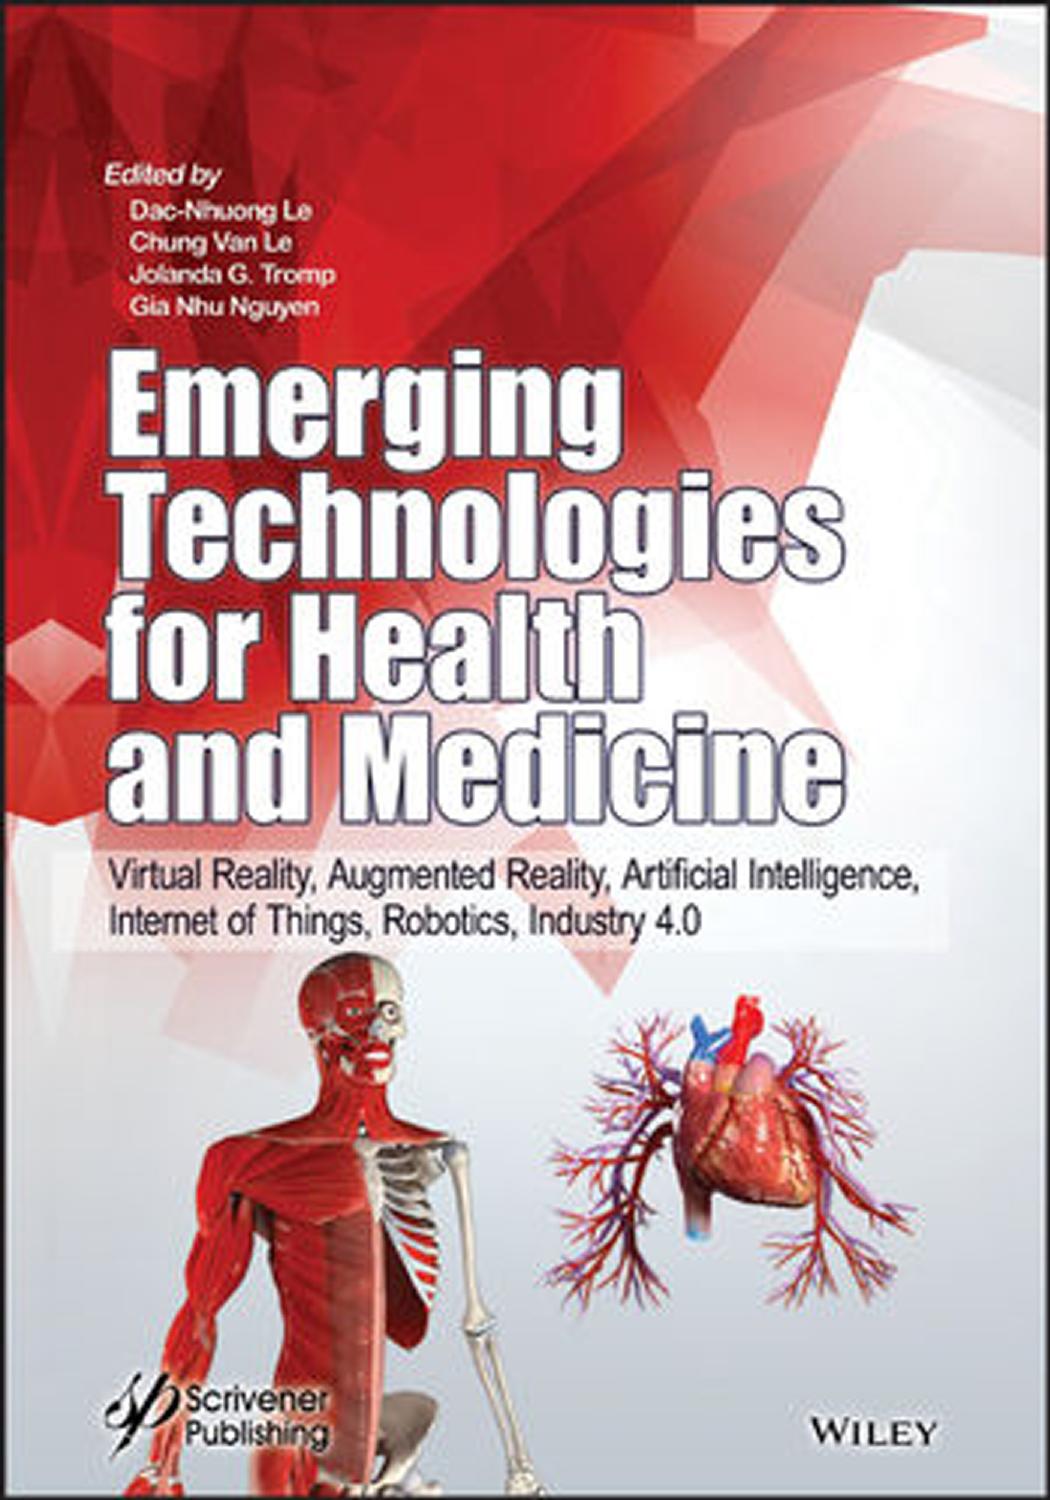 Emerging technologies for health and medicine 2018